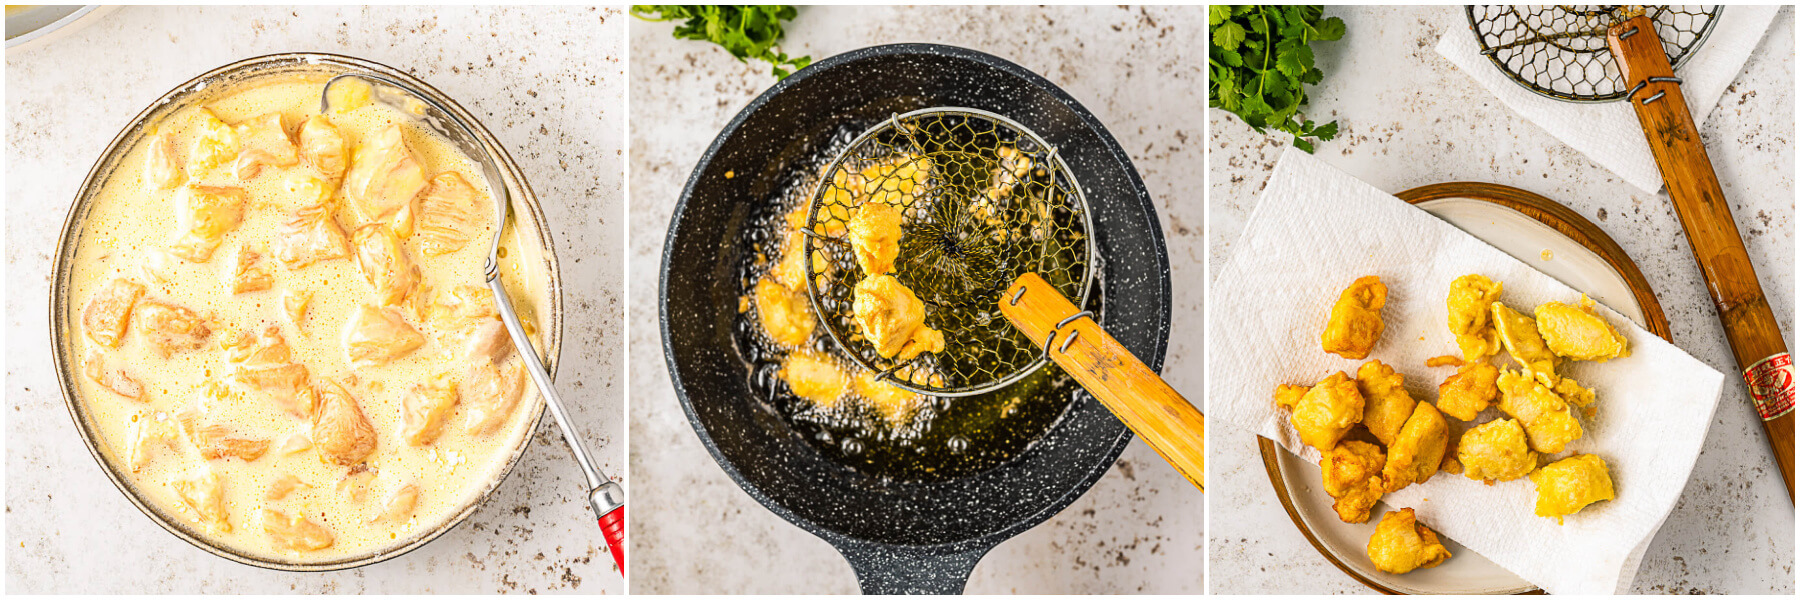 Process images showing how to fry Orange Chicken.